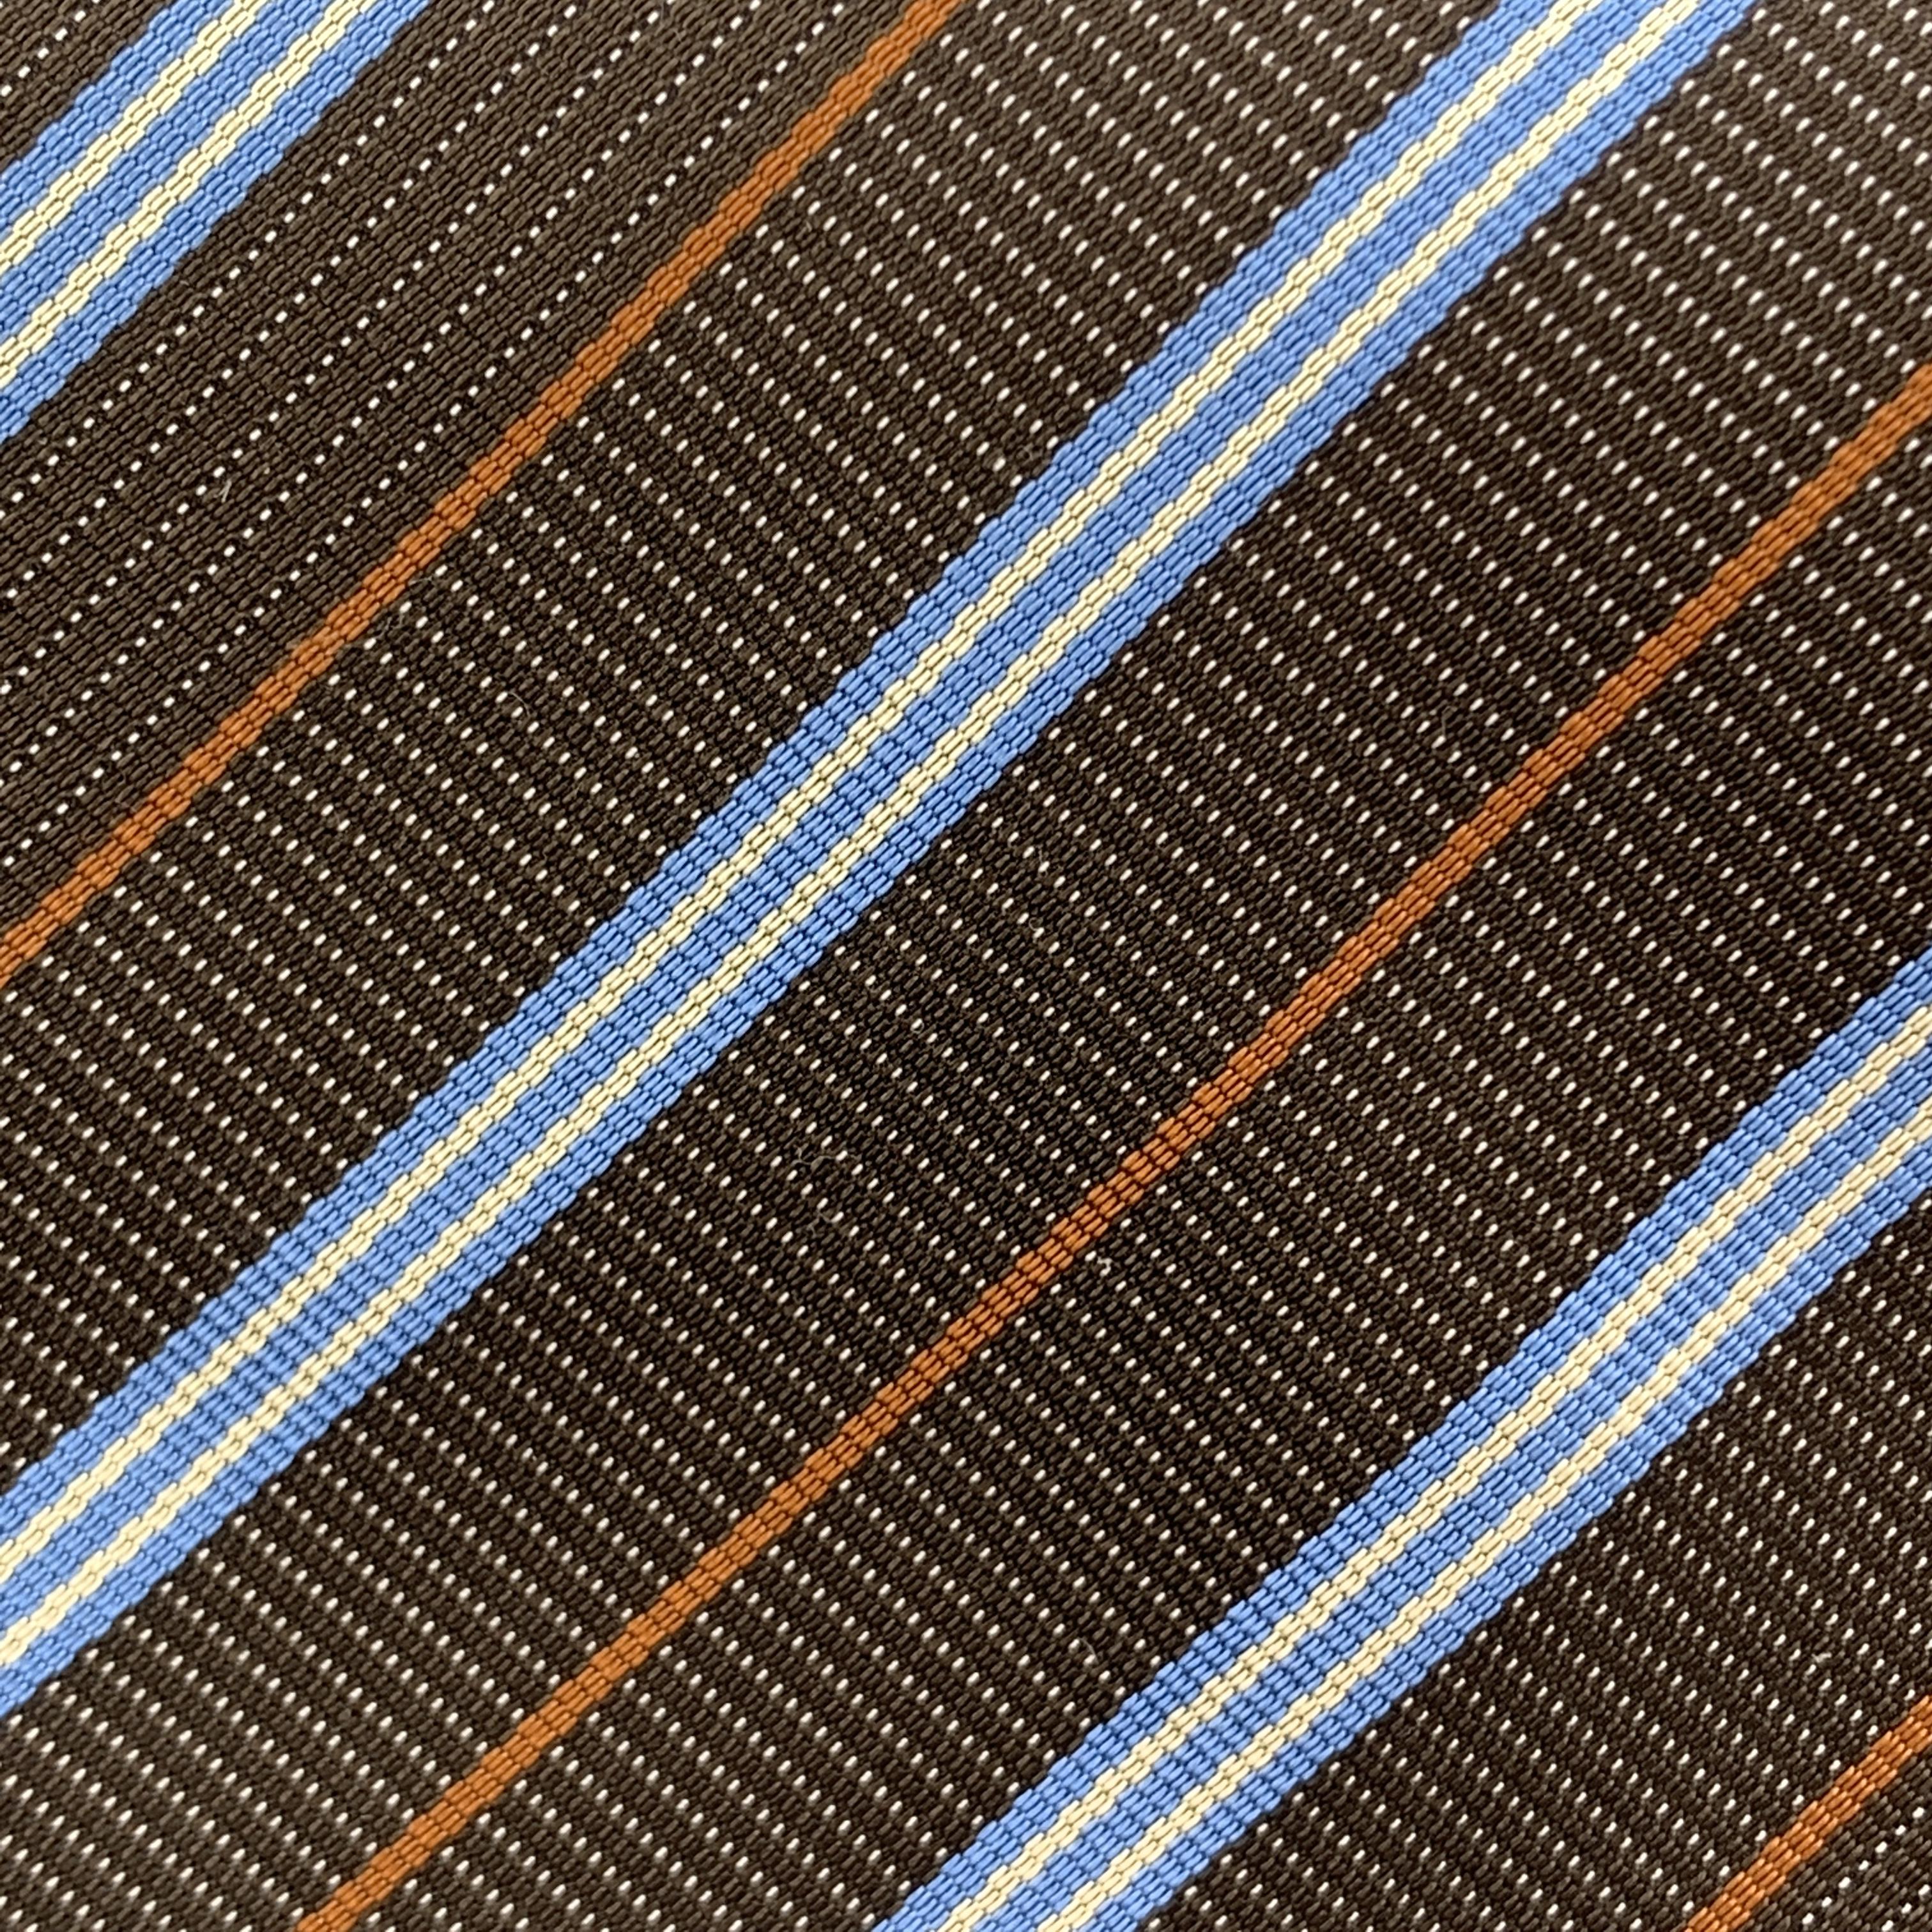 HERMES necktie comes in brown woven textured silk with all over blue and rust diagonal stripe print. Made in France.

Excellent Pre-Owned Condition.

Width: 3.75 in. 